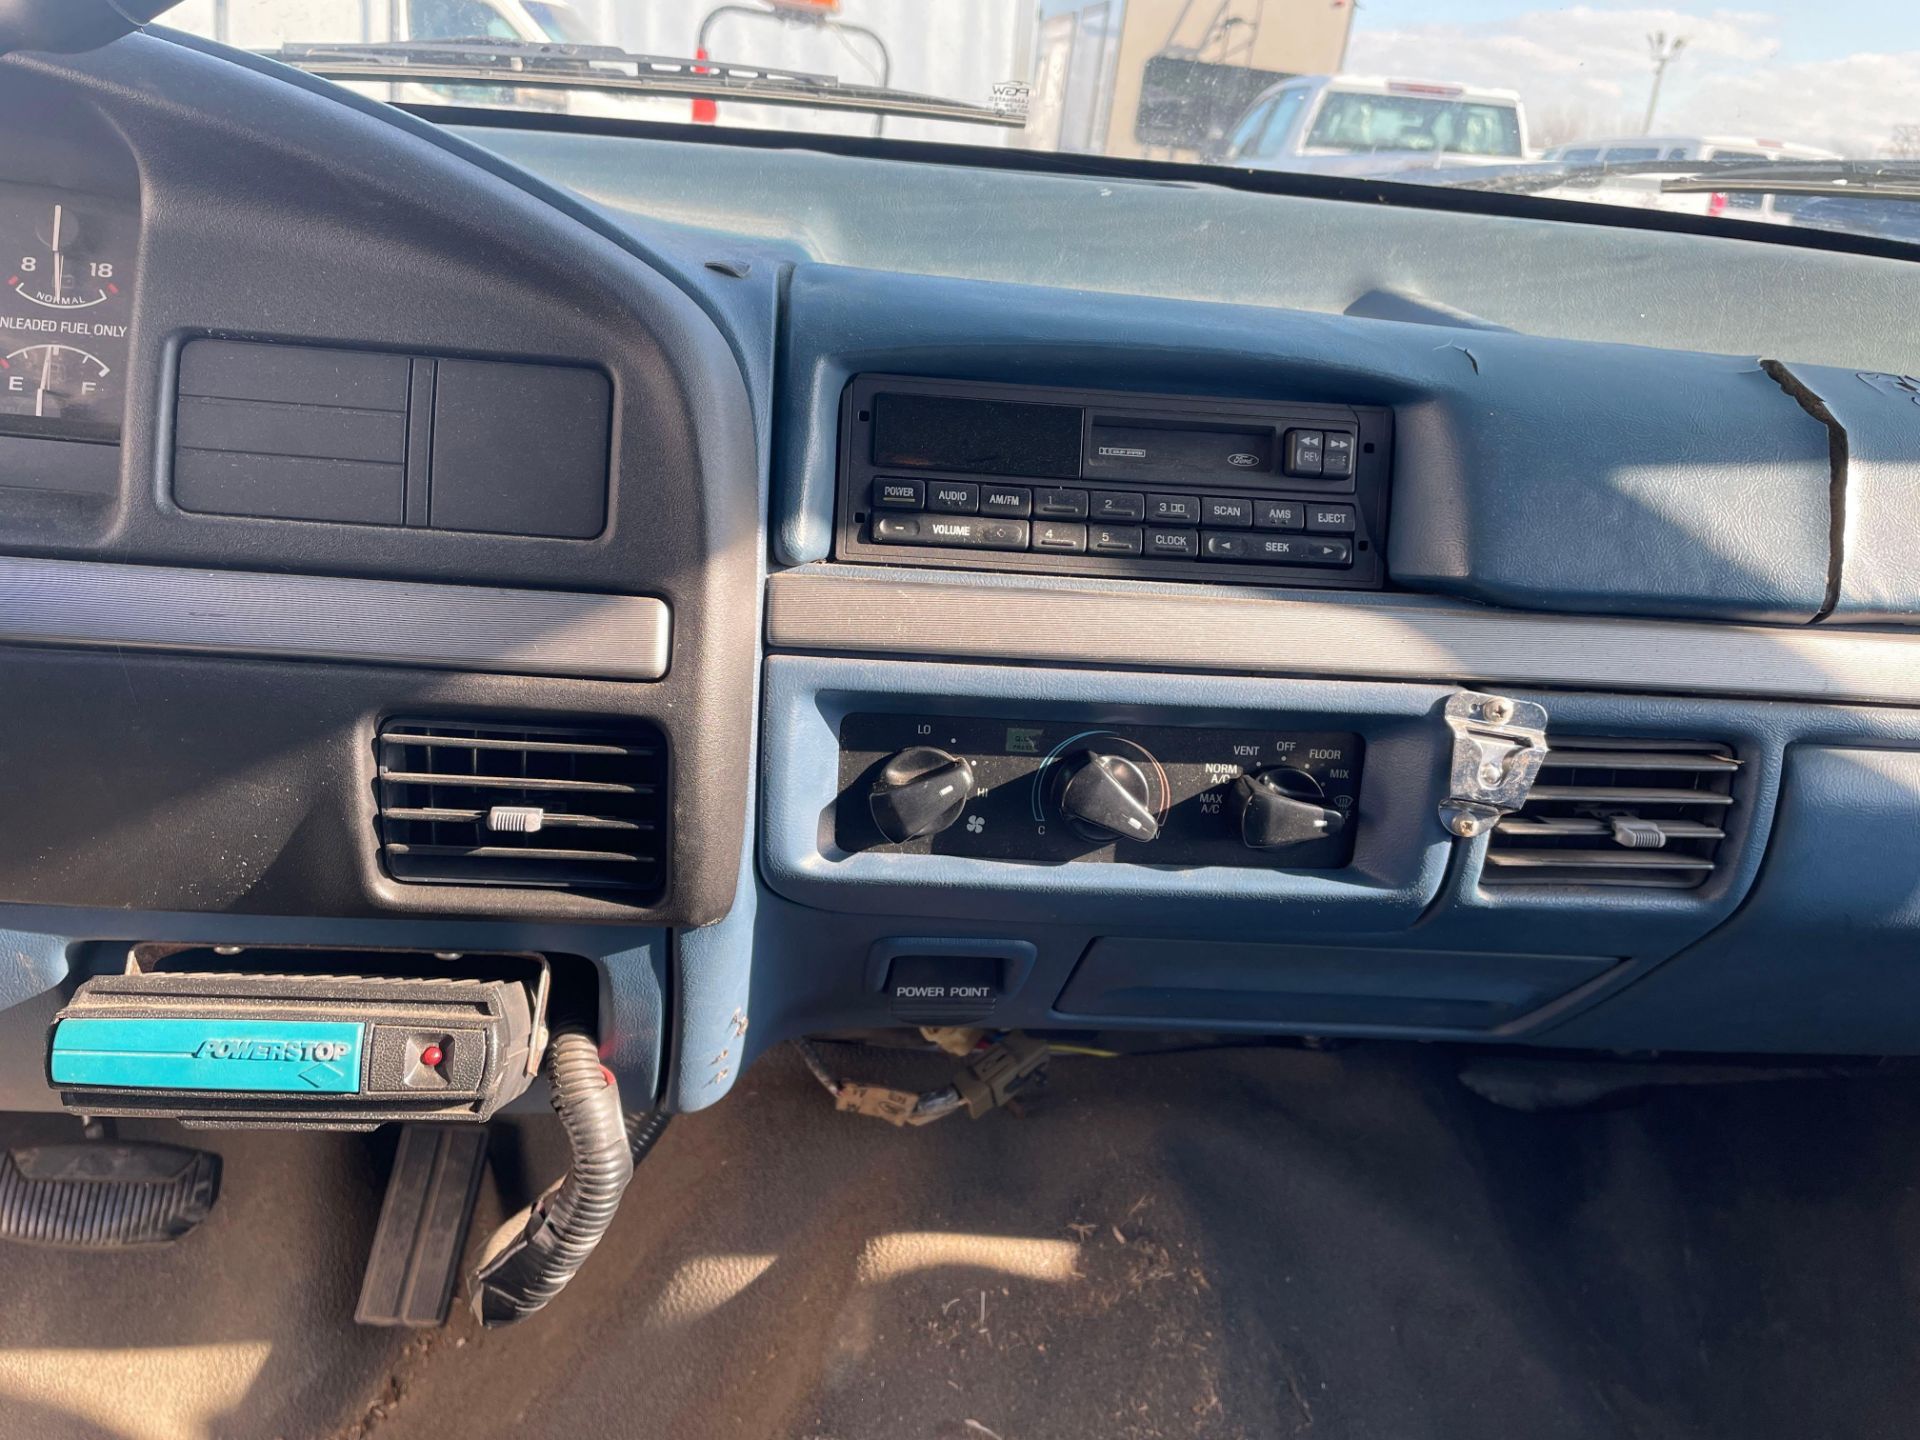 1994 Ford F350 XLT Crew Cab Dually Pickup Truck - Image 9 of 19